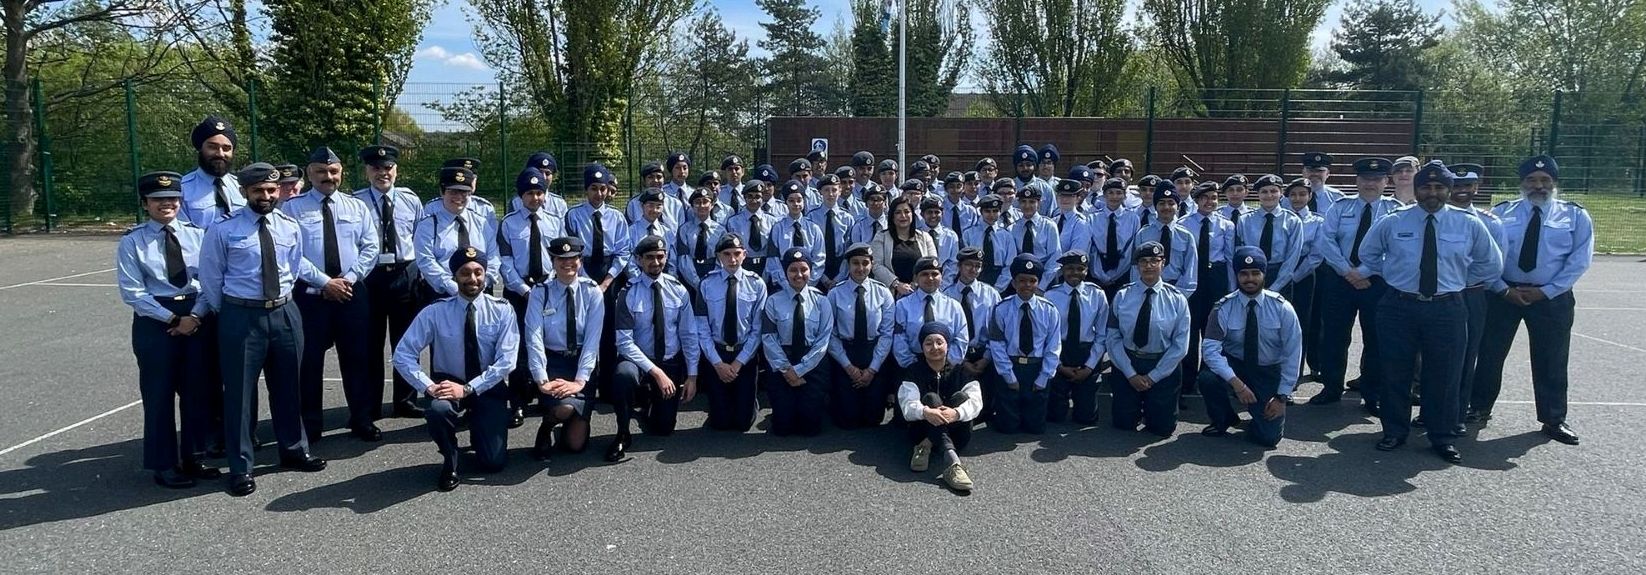 A large group of Royal Air Force Cadets from the Khalsa Academy Wolverhampton are standing outside in their uniforms, smiling at the camera. They are in two rows, with the front row crouching on one knee.